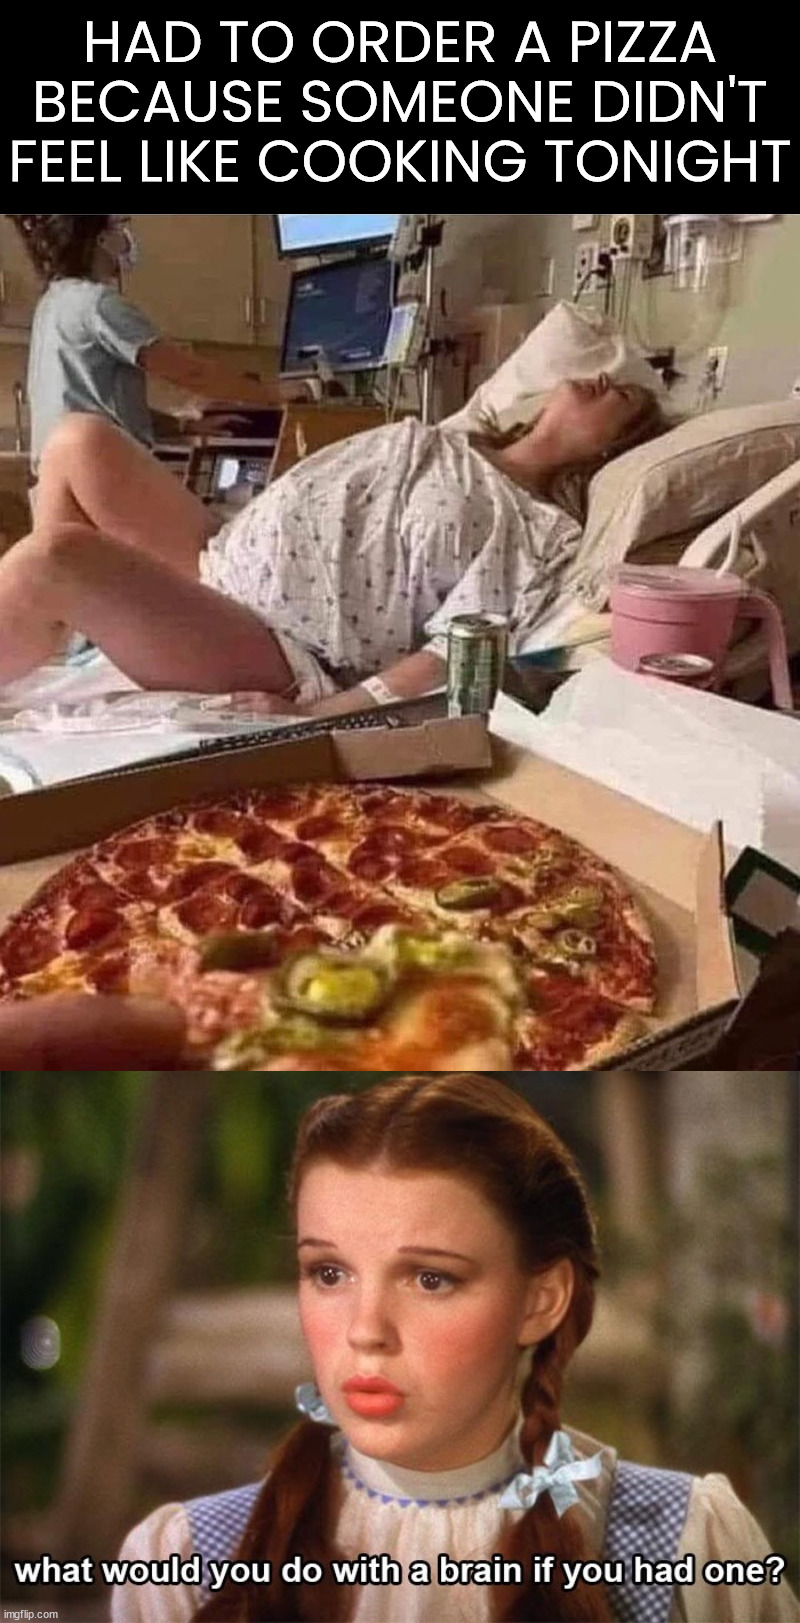 Guys, this might make her mad.... | HAD TO ORDER A PIZZA BECAUSE SOMEONE DIDN'T FEEL LIKE COOKING TONIGHT | image tagged in birth,pizza time stops,hospital,stupid people,pain | made w/ Imgflip meme maker